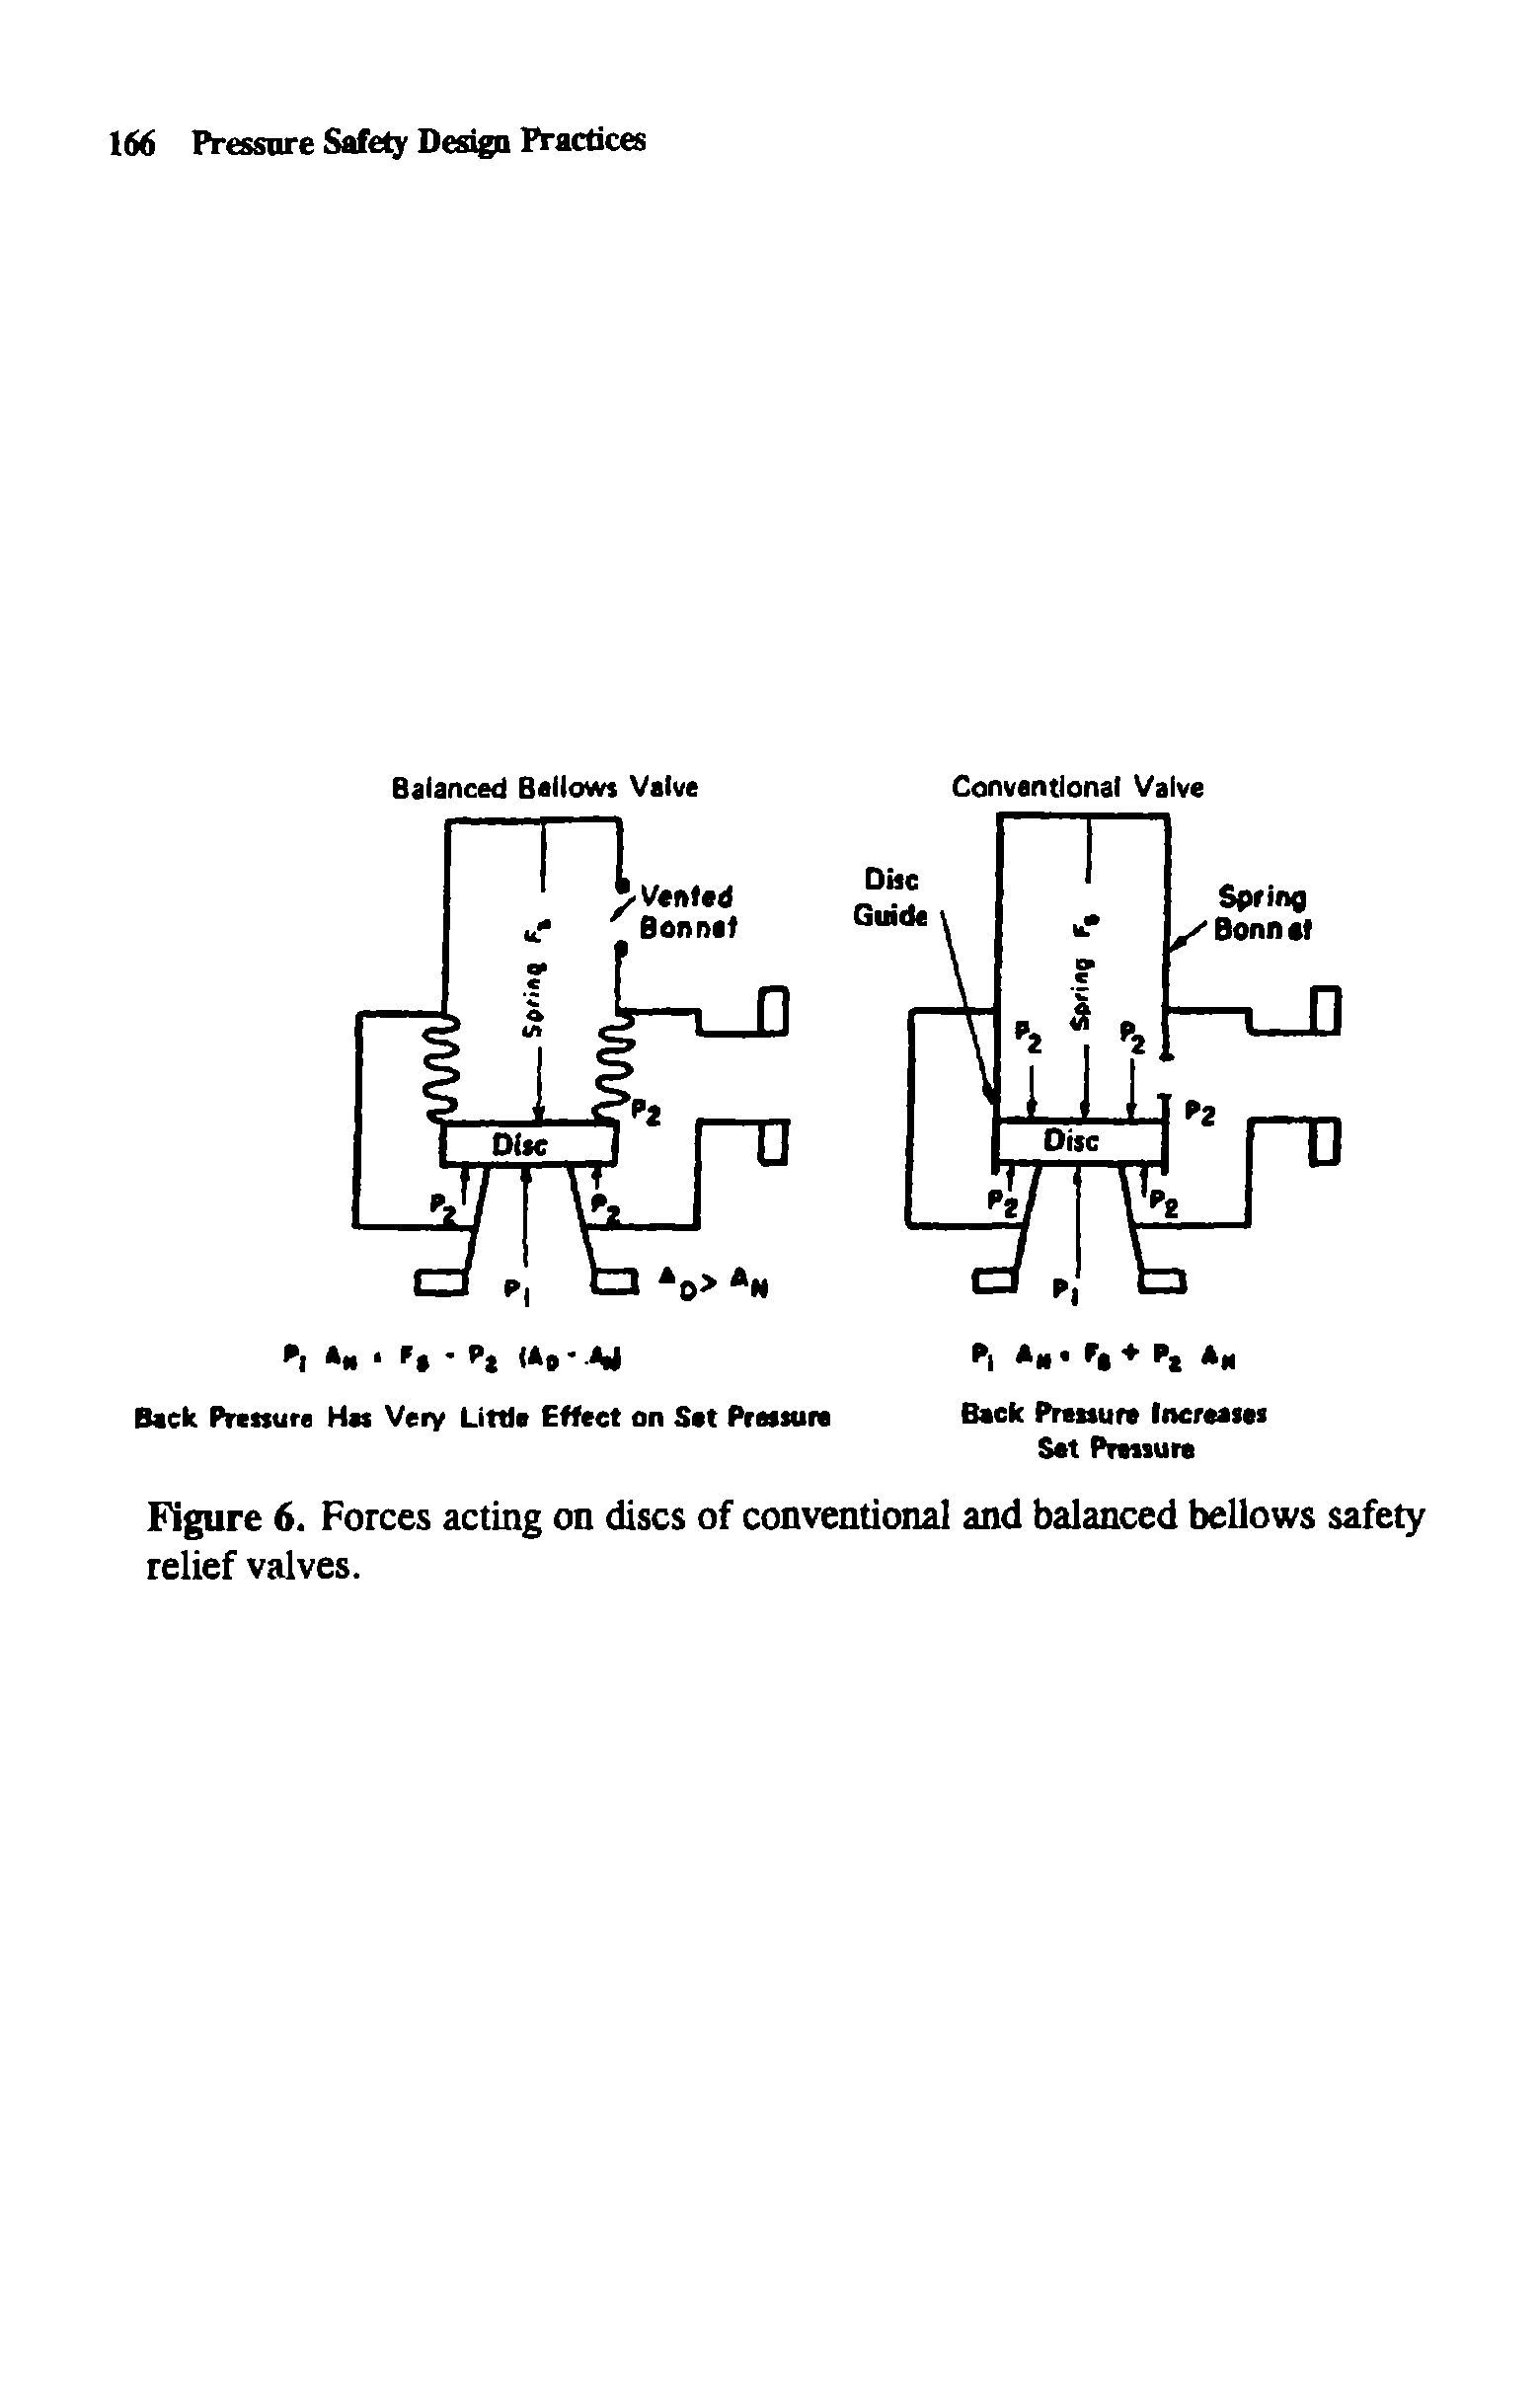 Figure 6. Forces acting on discs of conventional and balanced bellows safety relief valves.